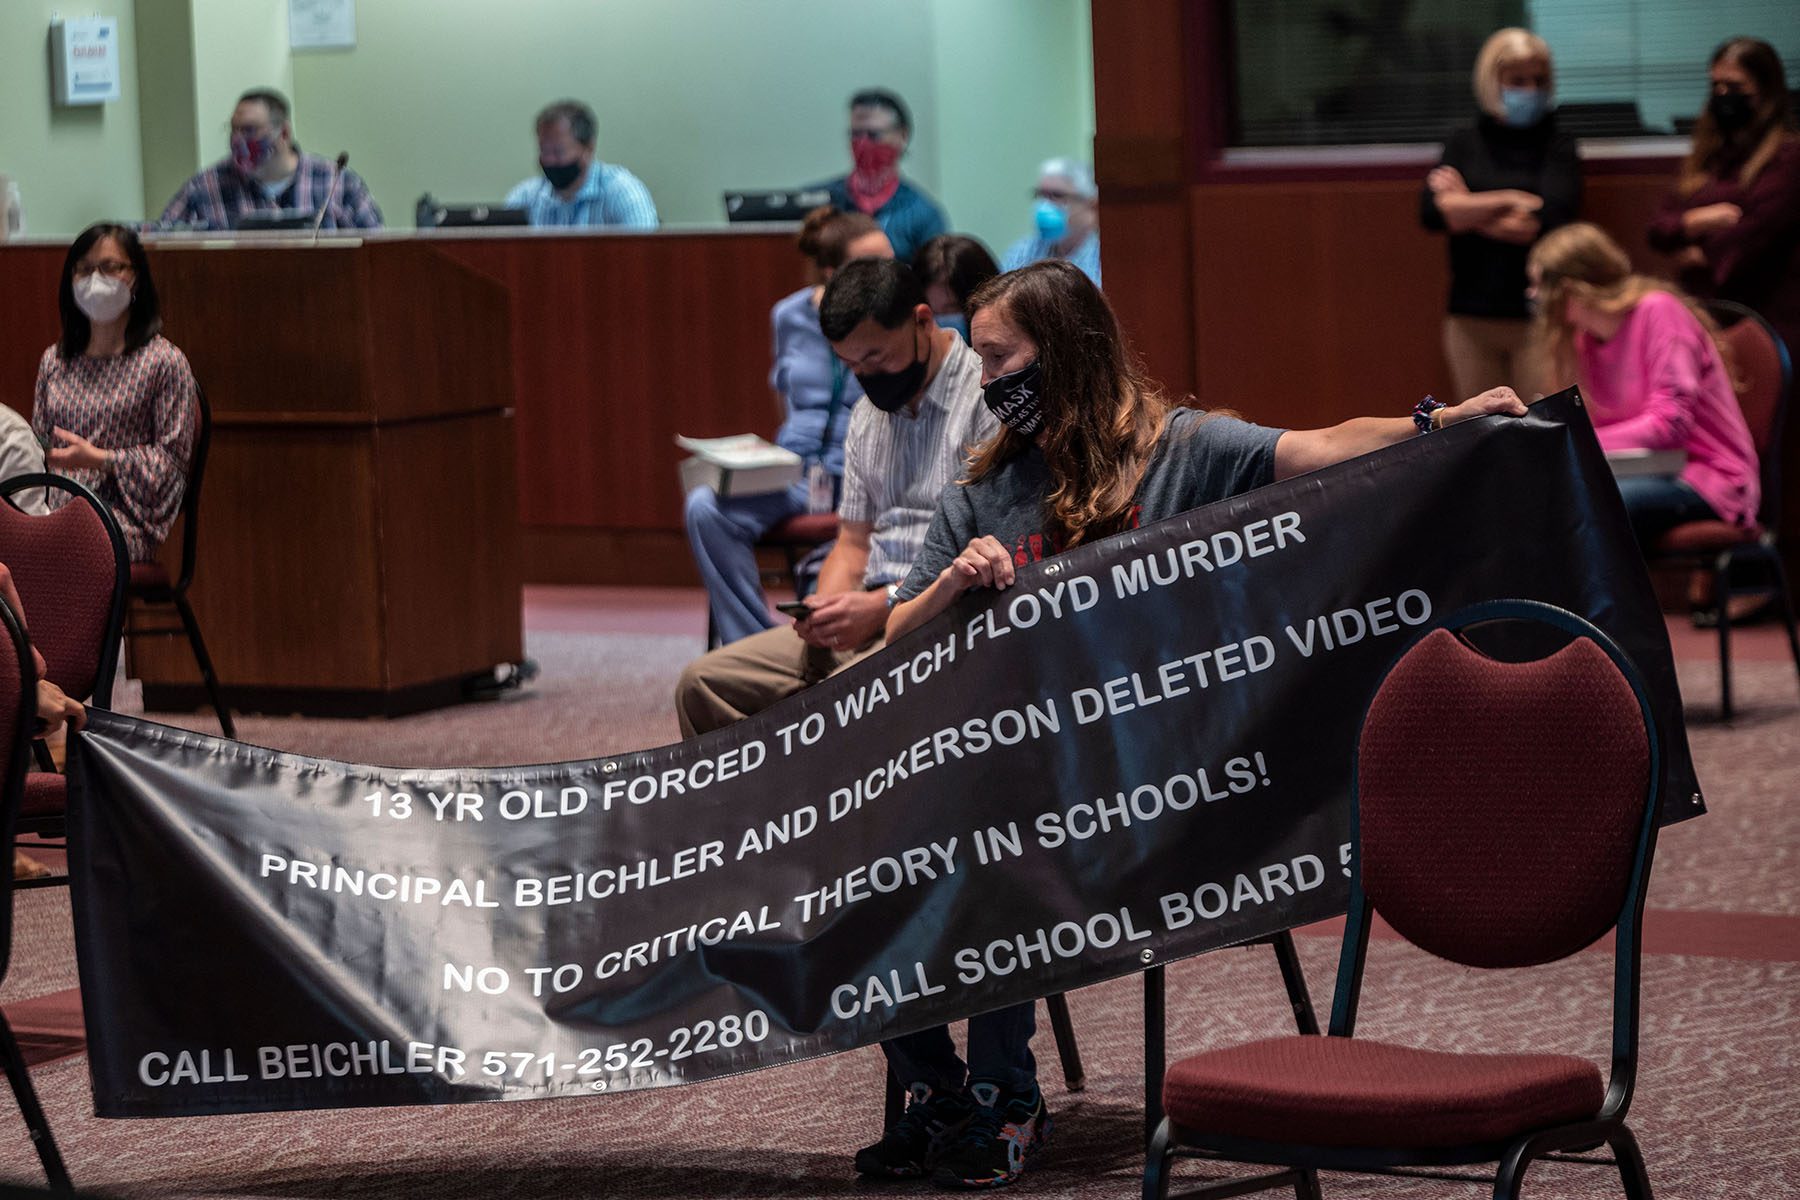 A woman holds up a sign that reads "13 year old forced to watch Floyd murder. Principal Beichler and Dickerson deleted video. No to critical theory in schools!"